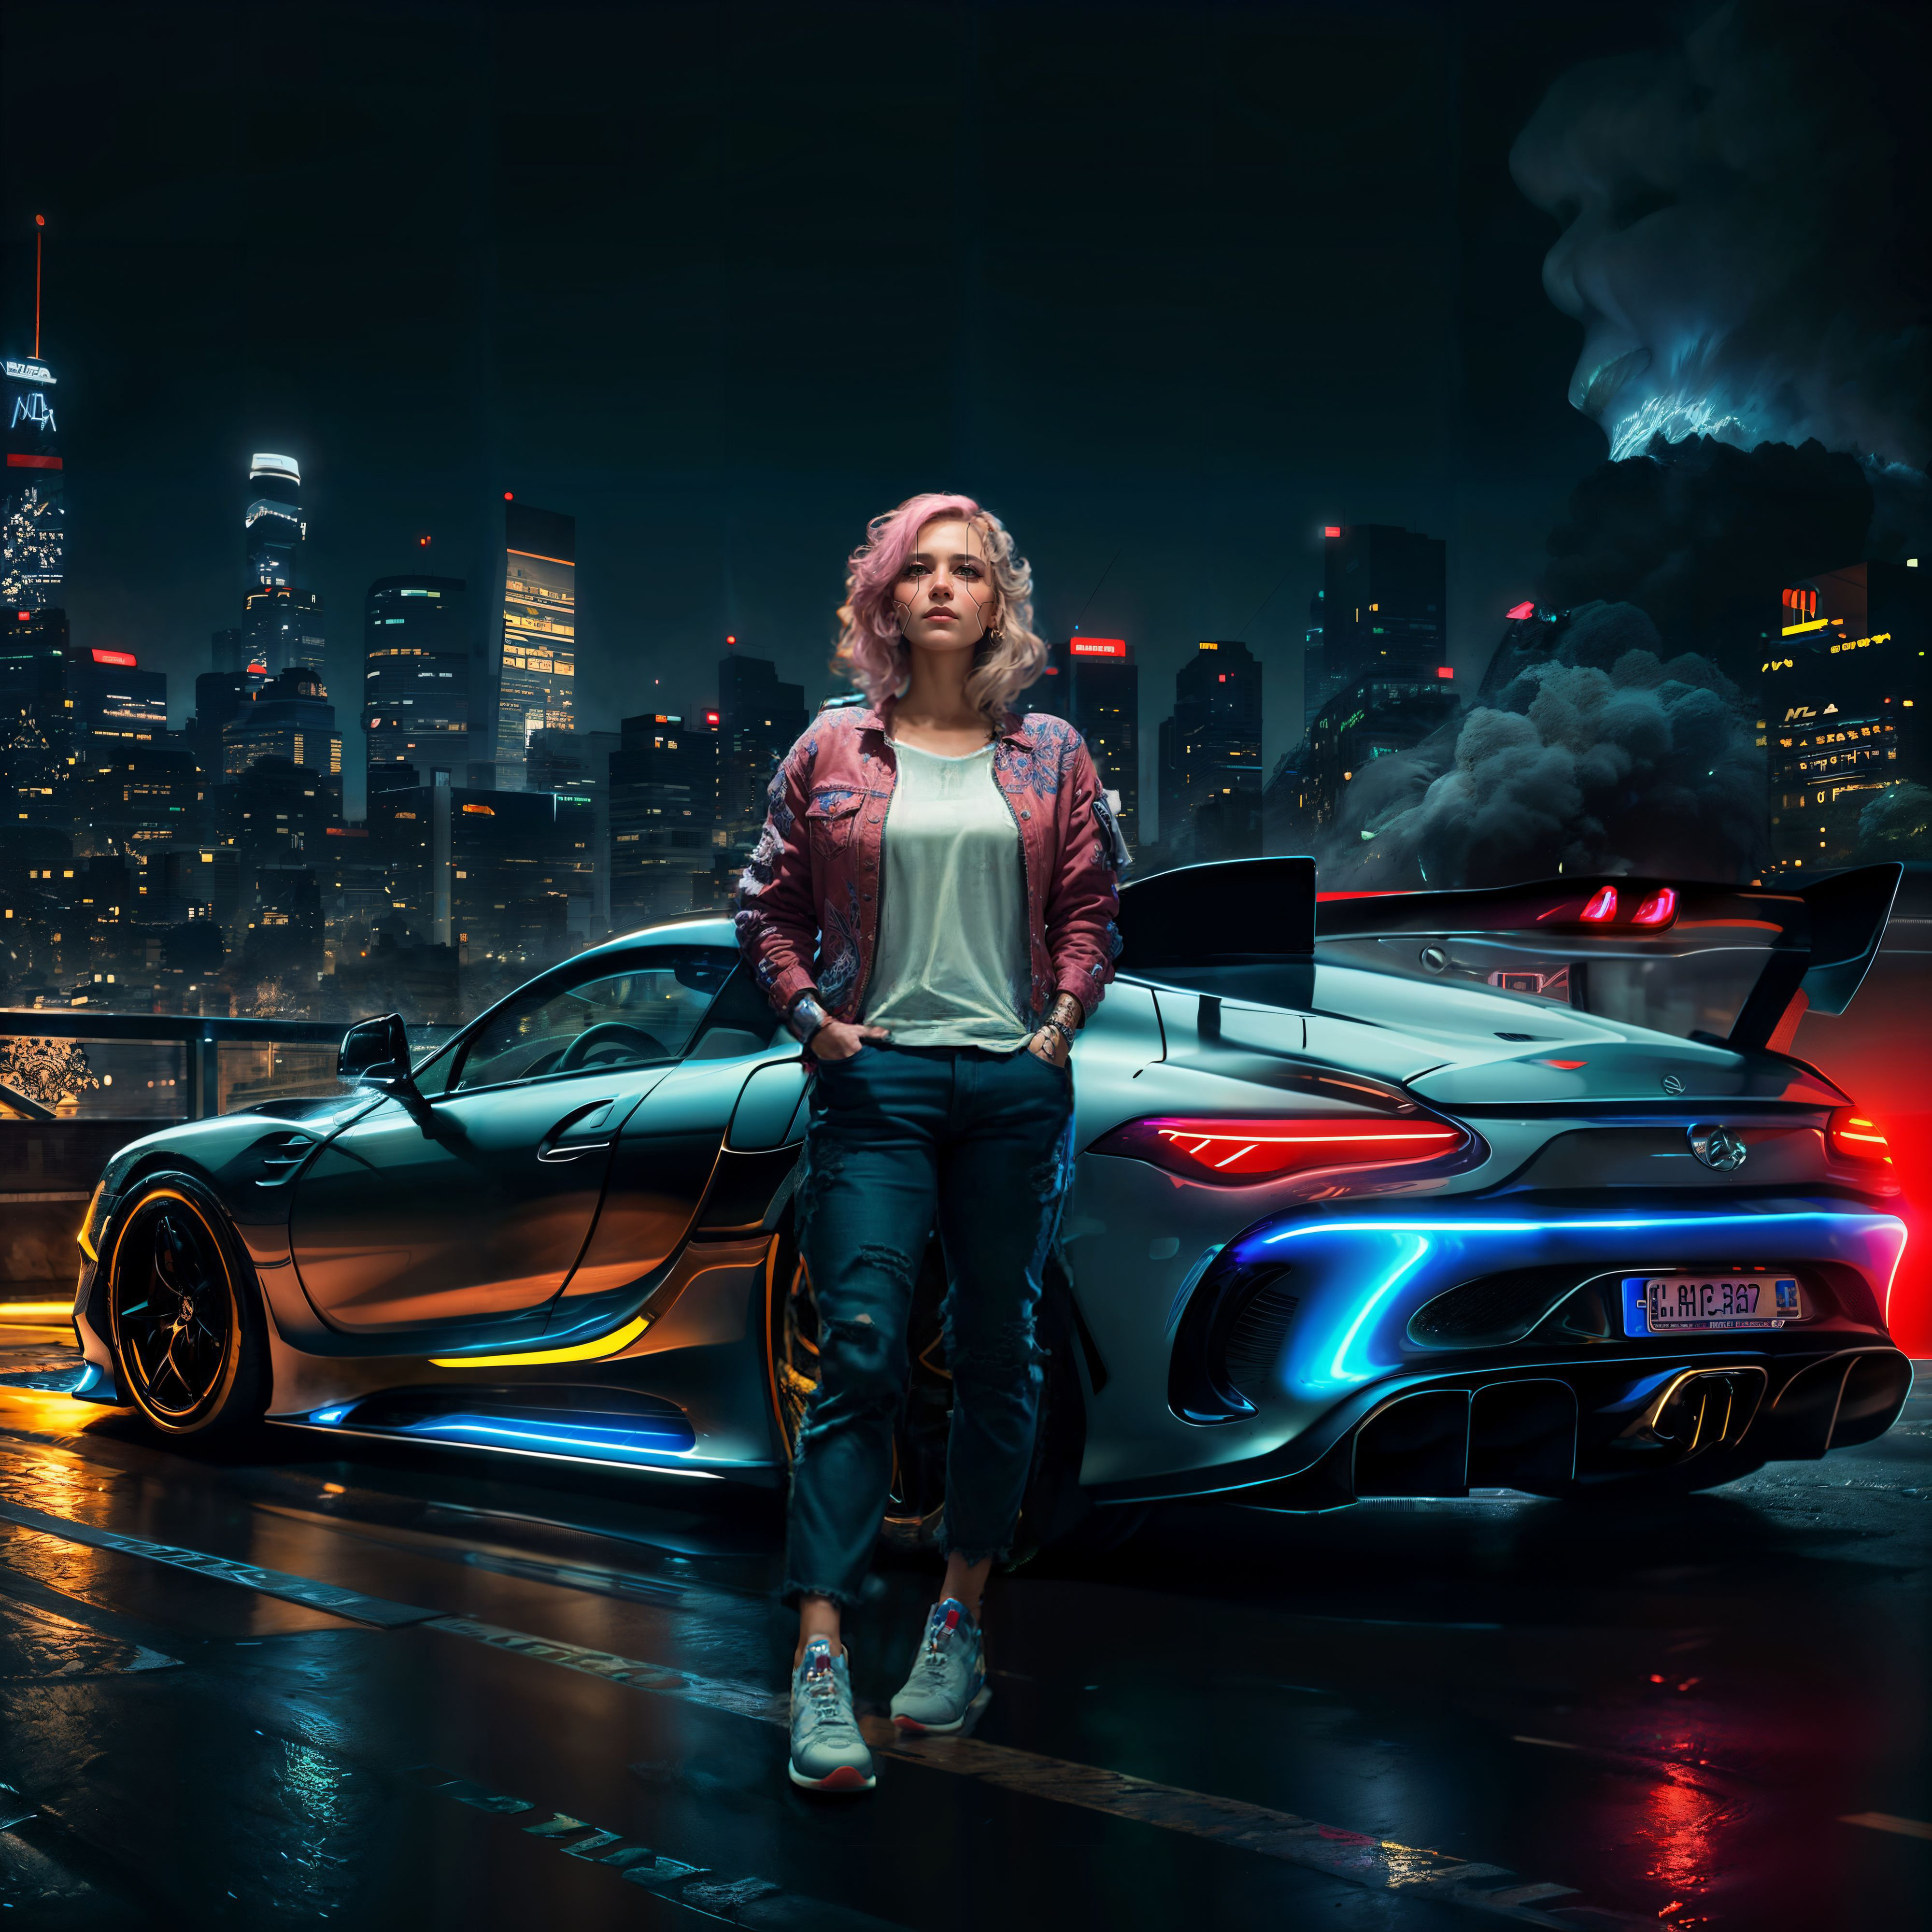 A woman standing next to a futuristic concept car in a city at night.